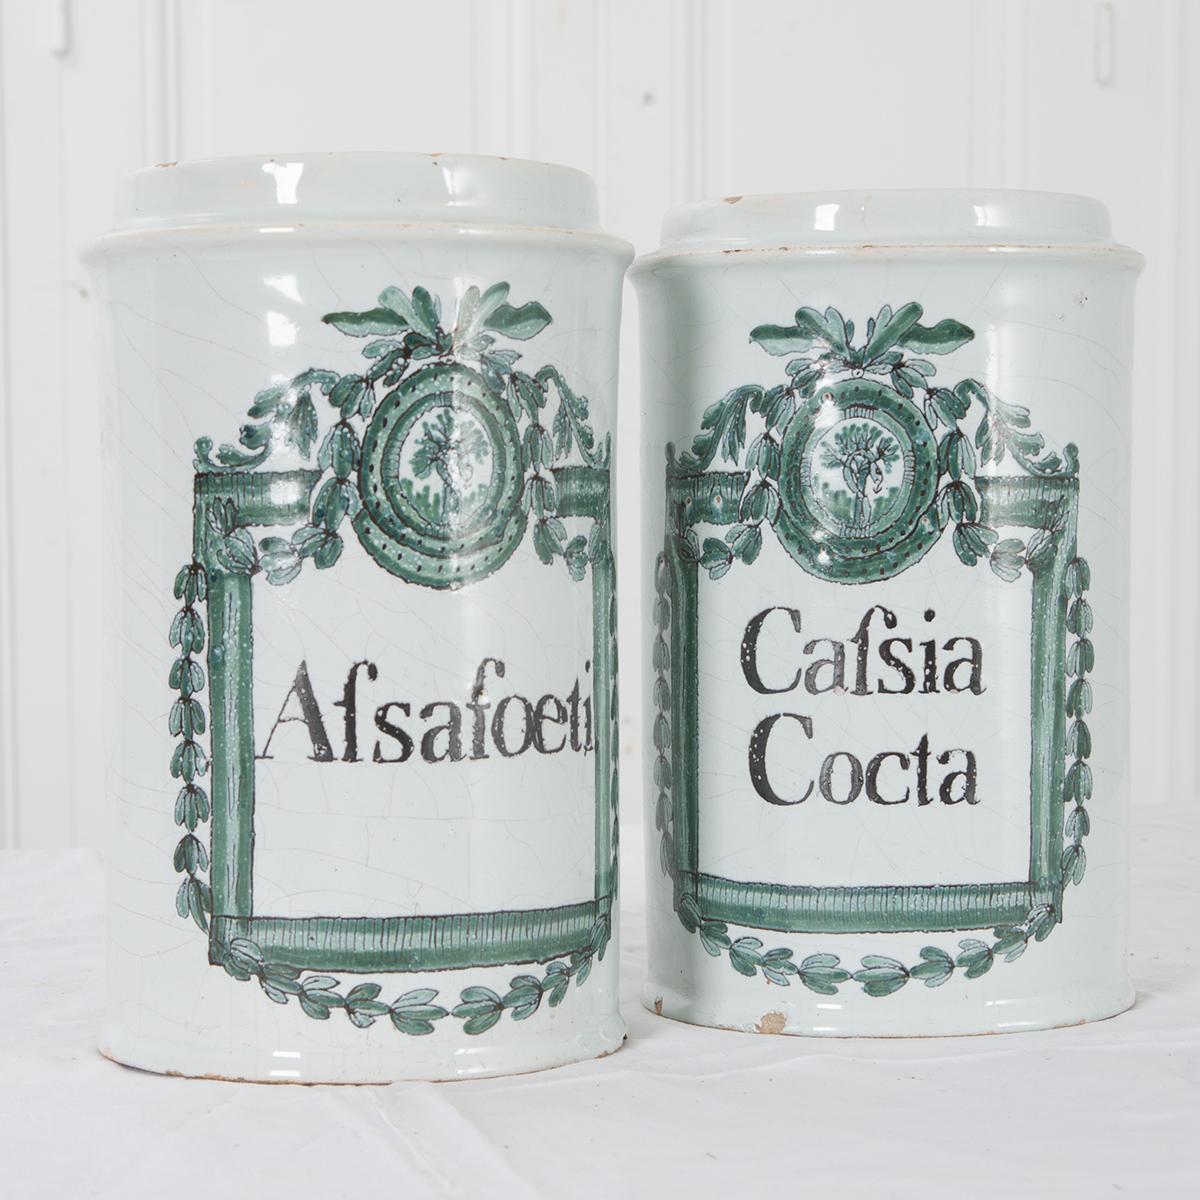 A gorgeous pair of Italian painted faïence storage jars, once used in a French pharmacy, with the names of their contents hand-painted on their fronts. This beautiful pair of jars dates to the end of the 18th century, having been made circa 1780.